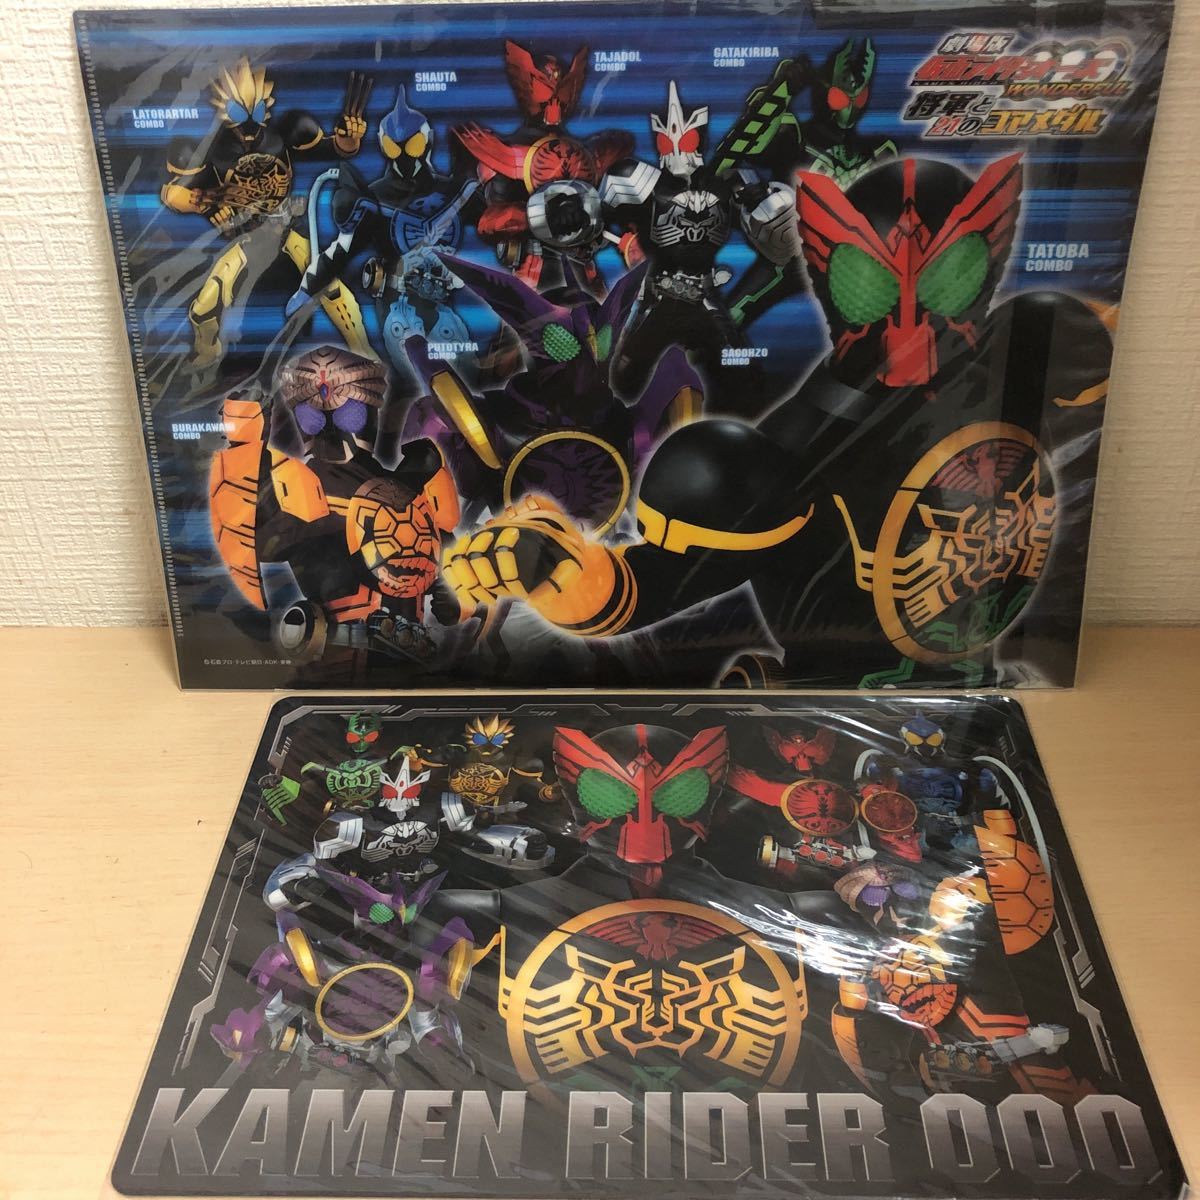 SALE／88%OFF】 劇場版 仮面ライダーゴースト 劇場限定クリアファイル 